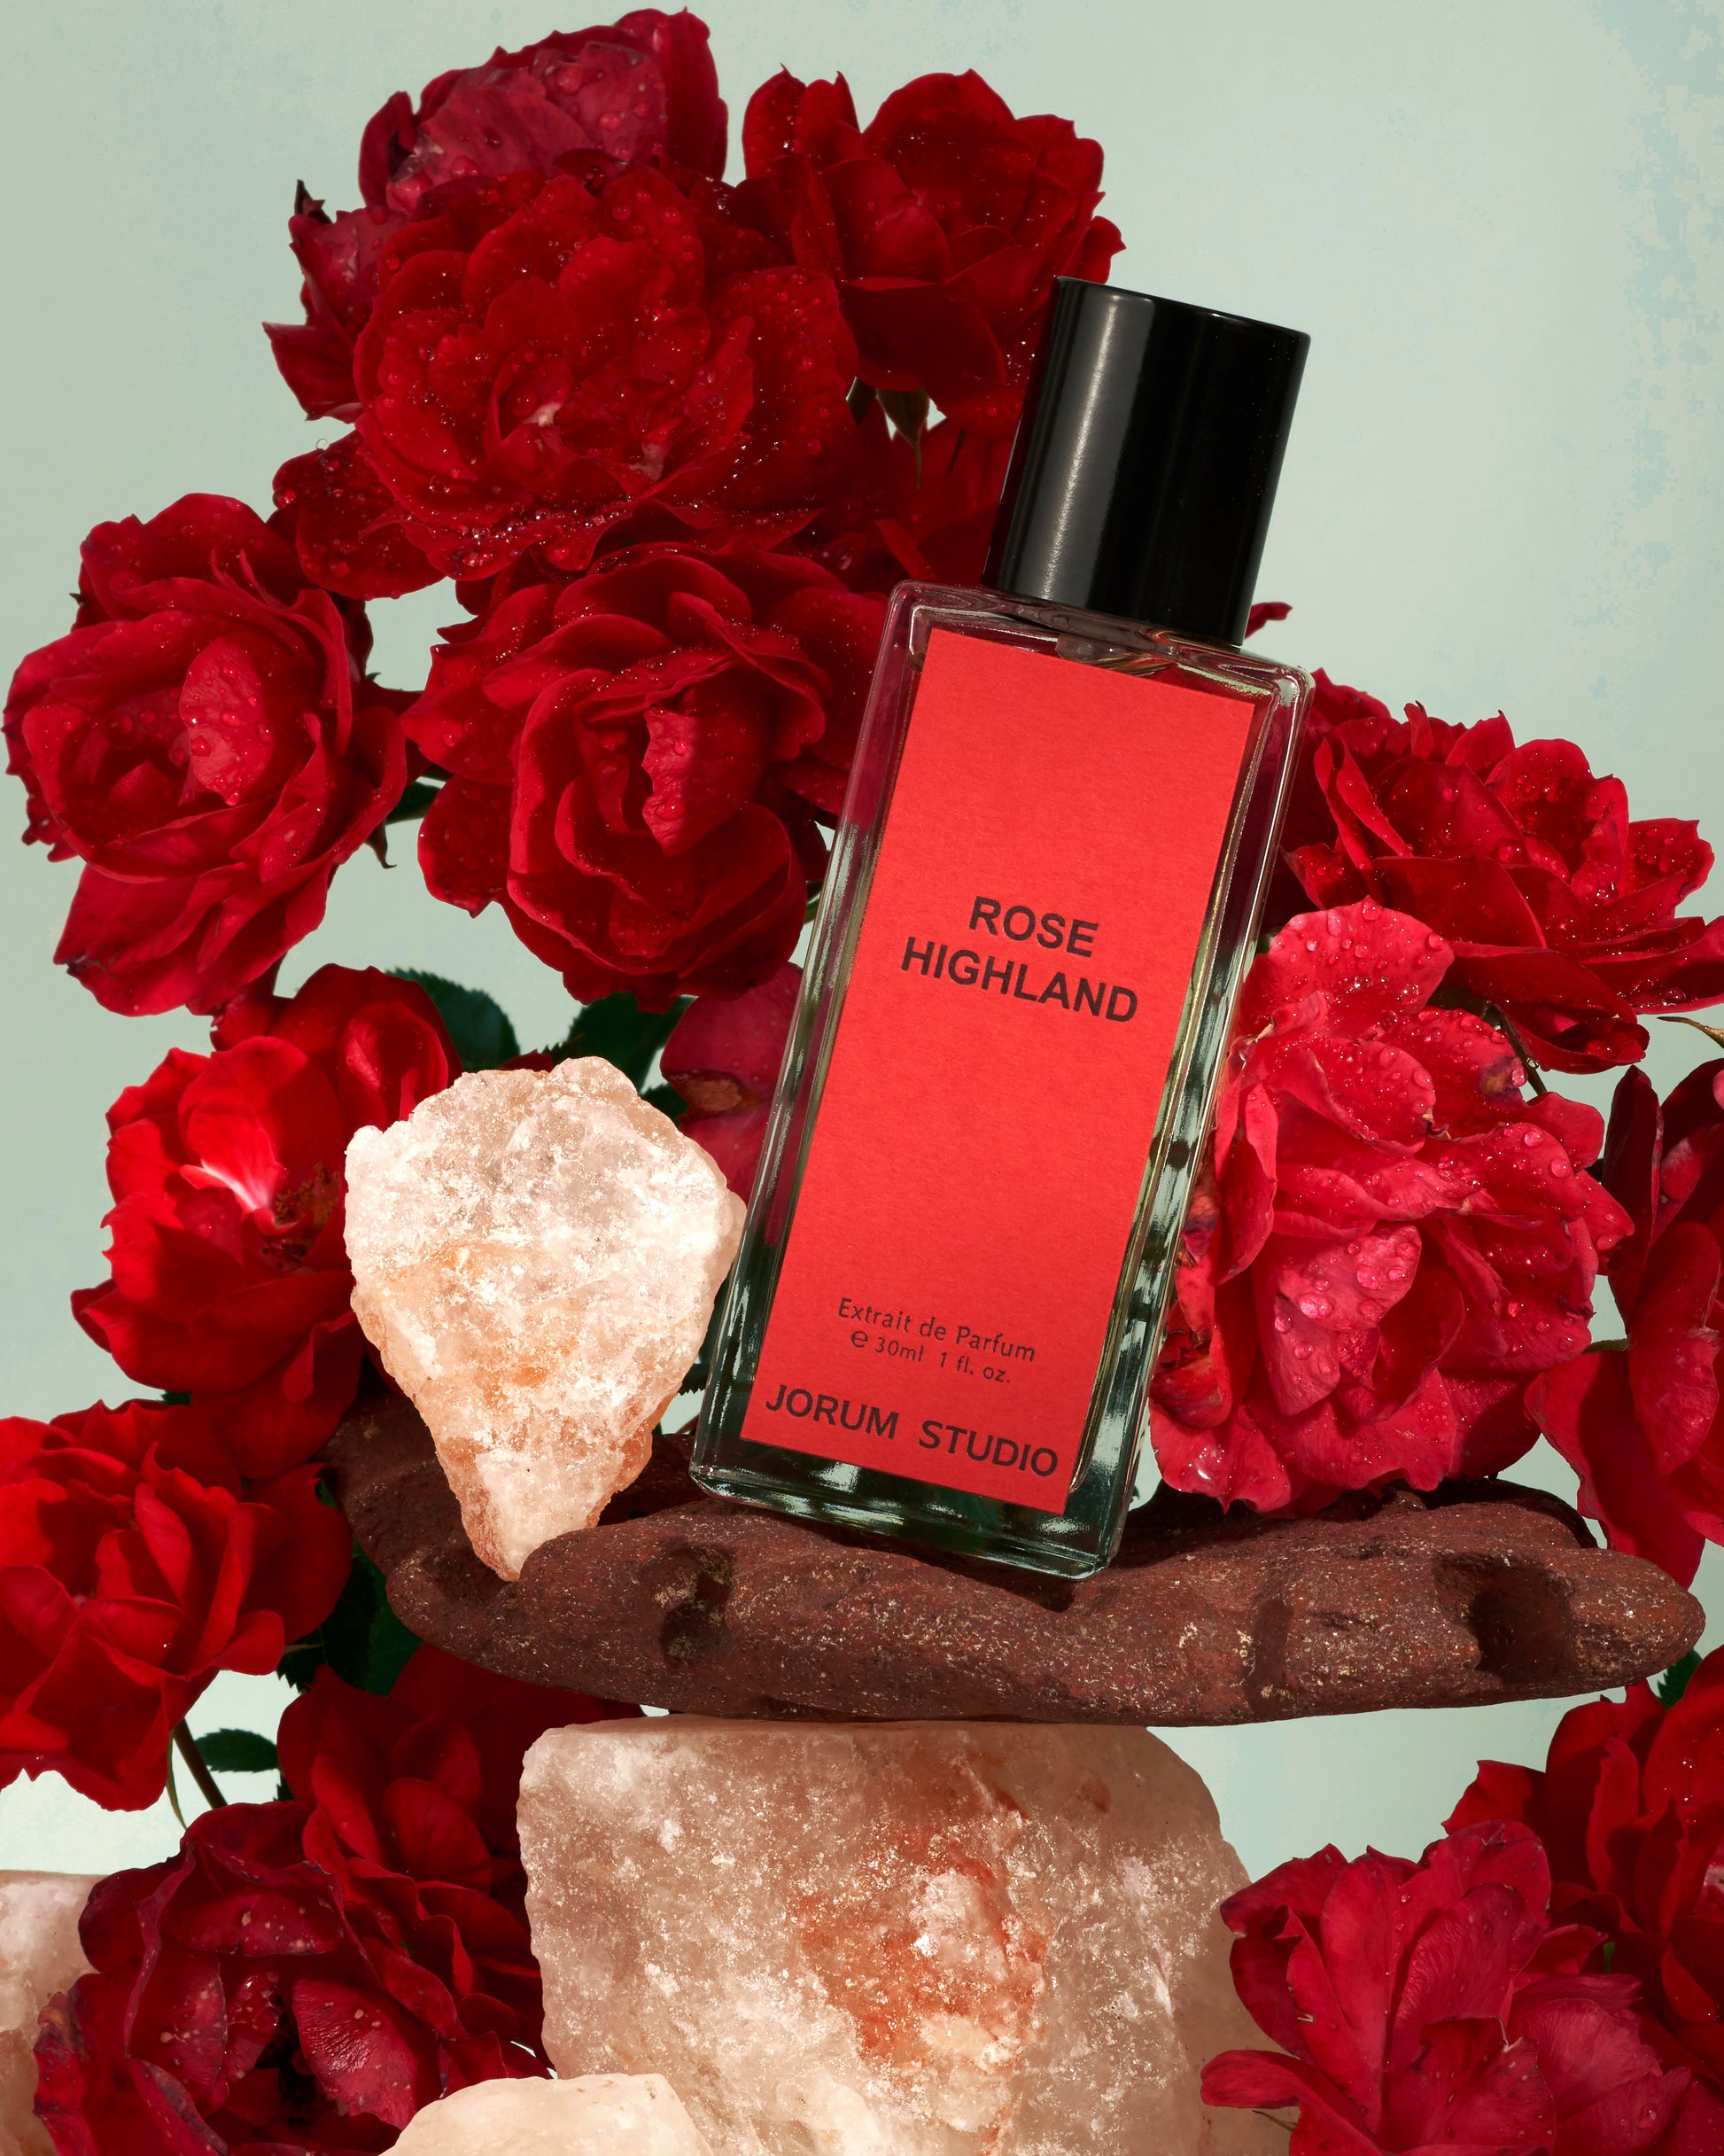 Jorum Studio Rose Highland perfume bottle arranged in a still-life featuring red roses and pink salt crystals